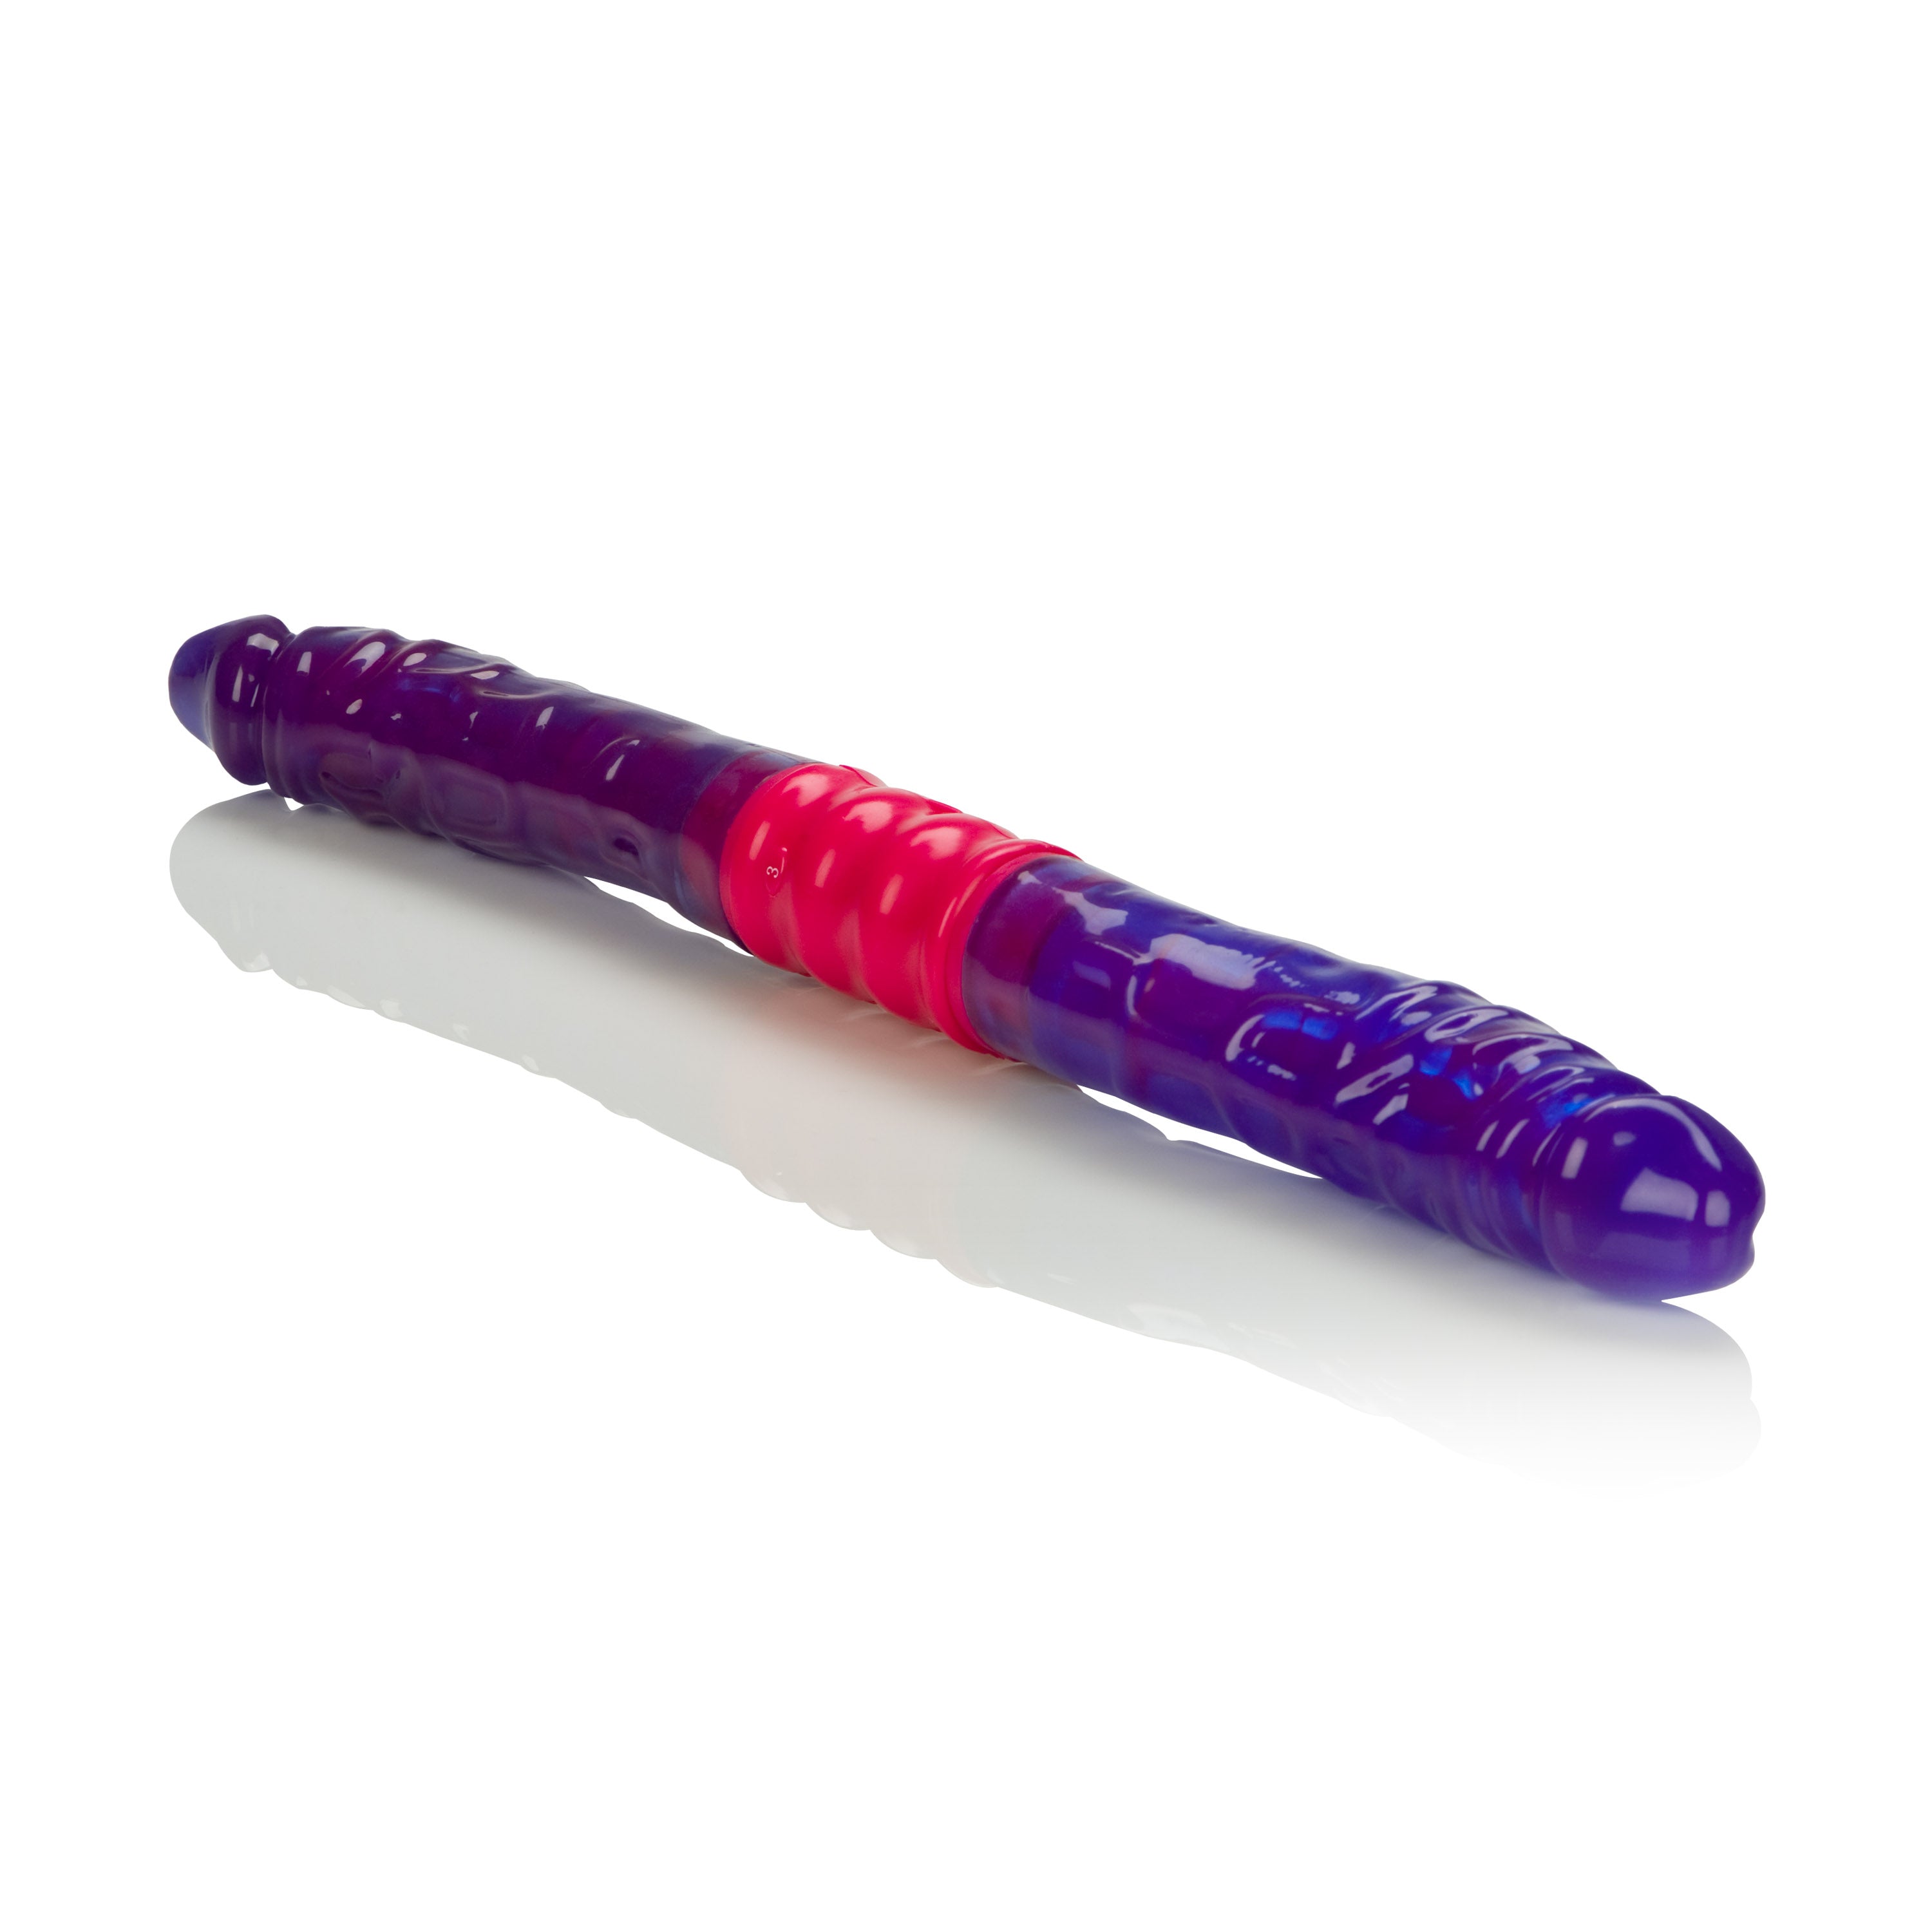 Dual Vibrating Flexi Dong - 15-Inch Double-Ended Vibrating Dildo by California Exotic Novelties